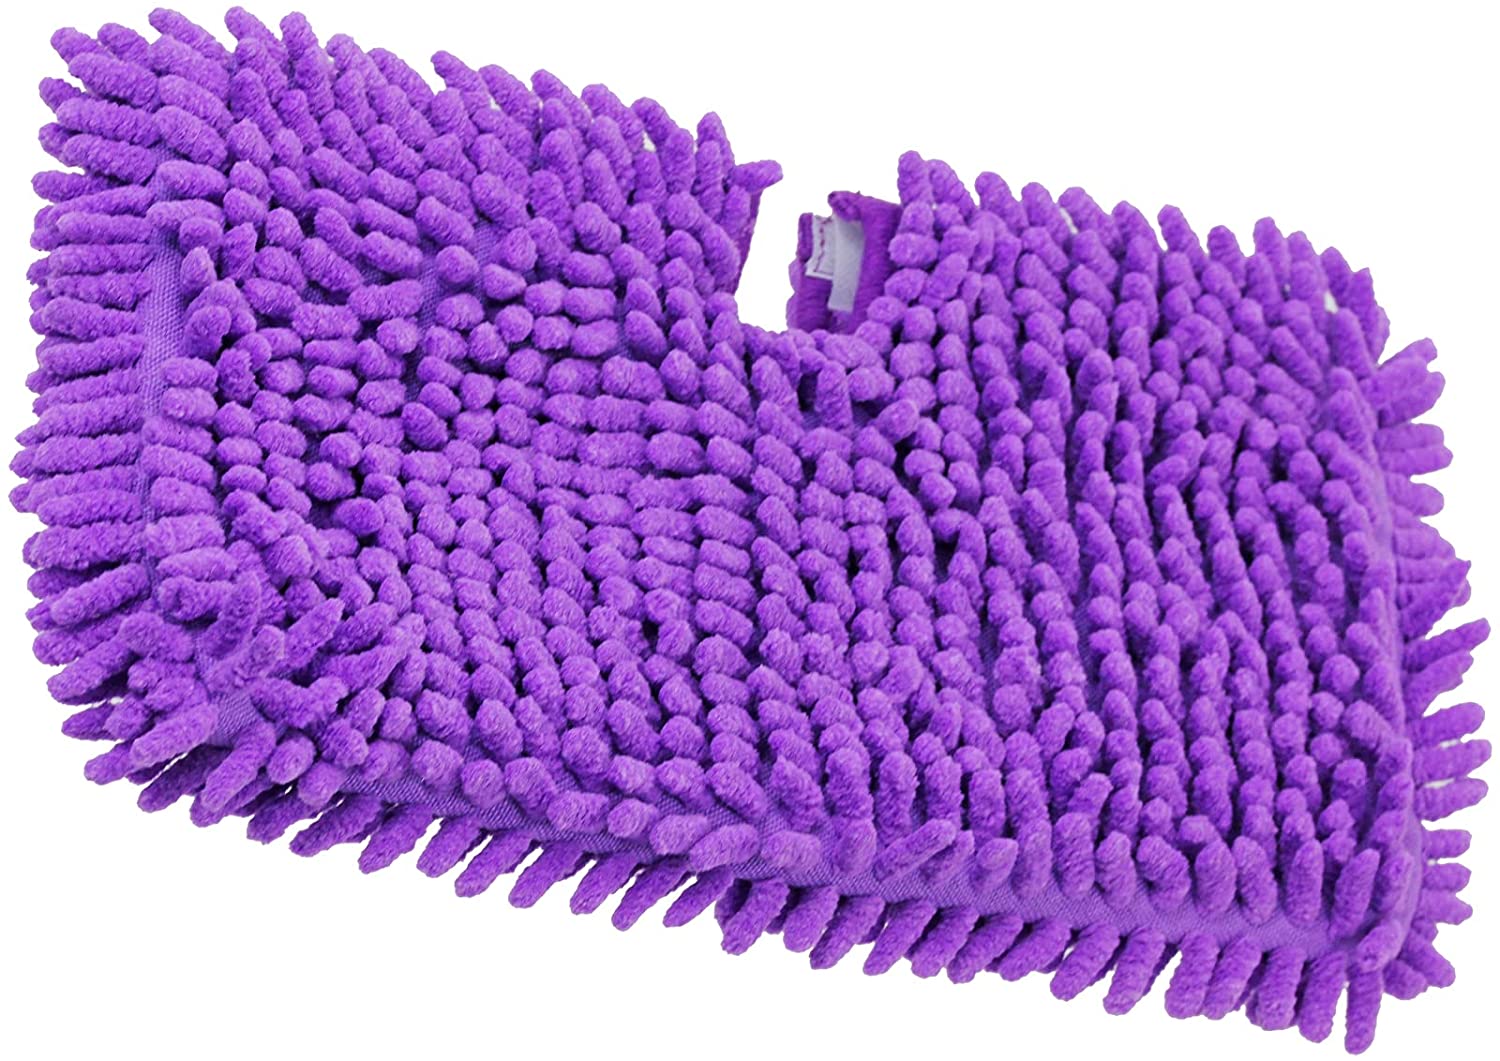 Pocket Cover Pad for Steam Cleaner Mop Coral Purple 32cm x 19cm Universal 6 Pads